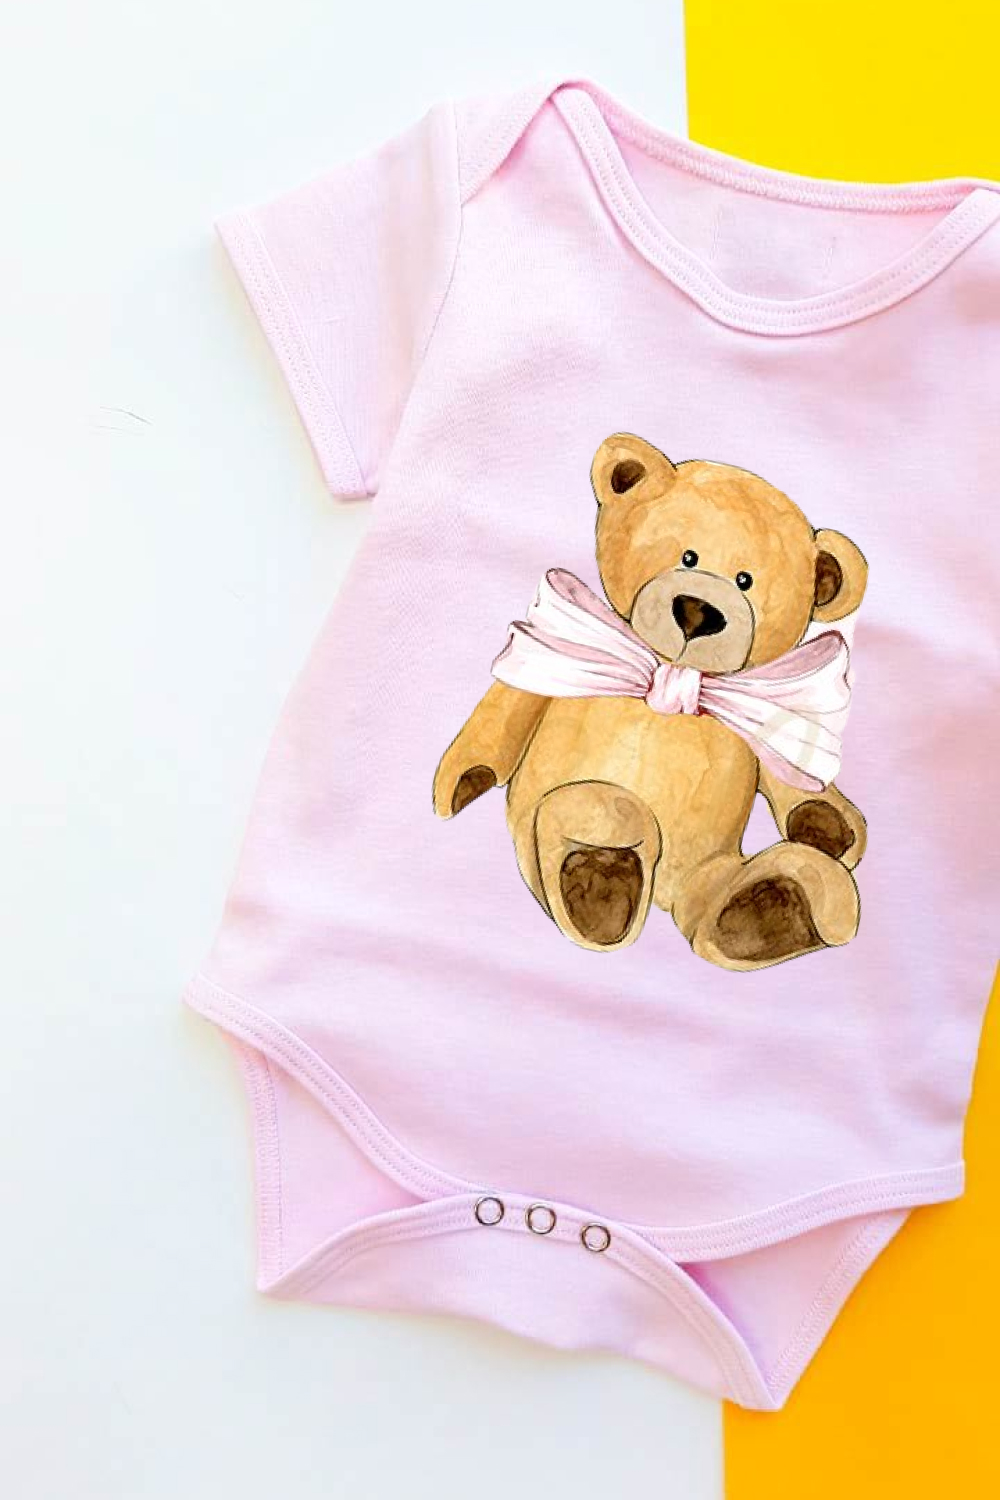 Unique print for baby things.